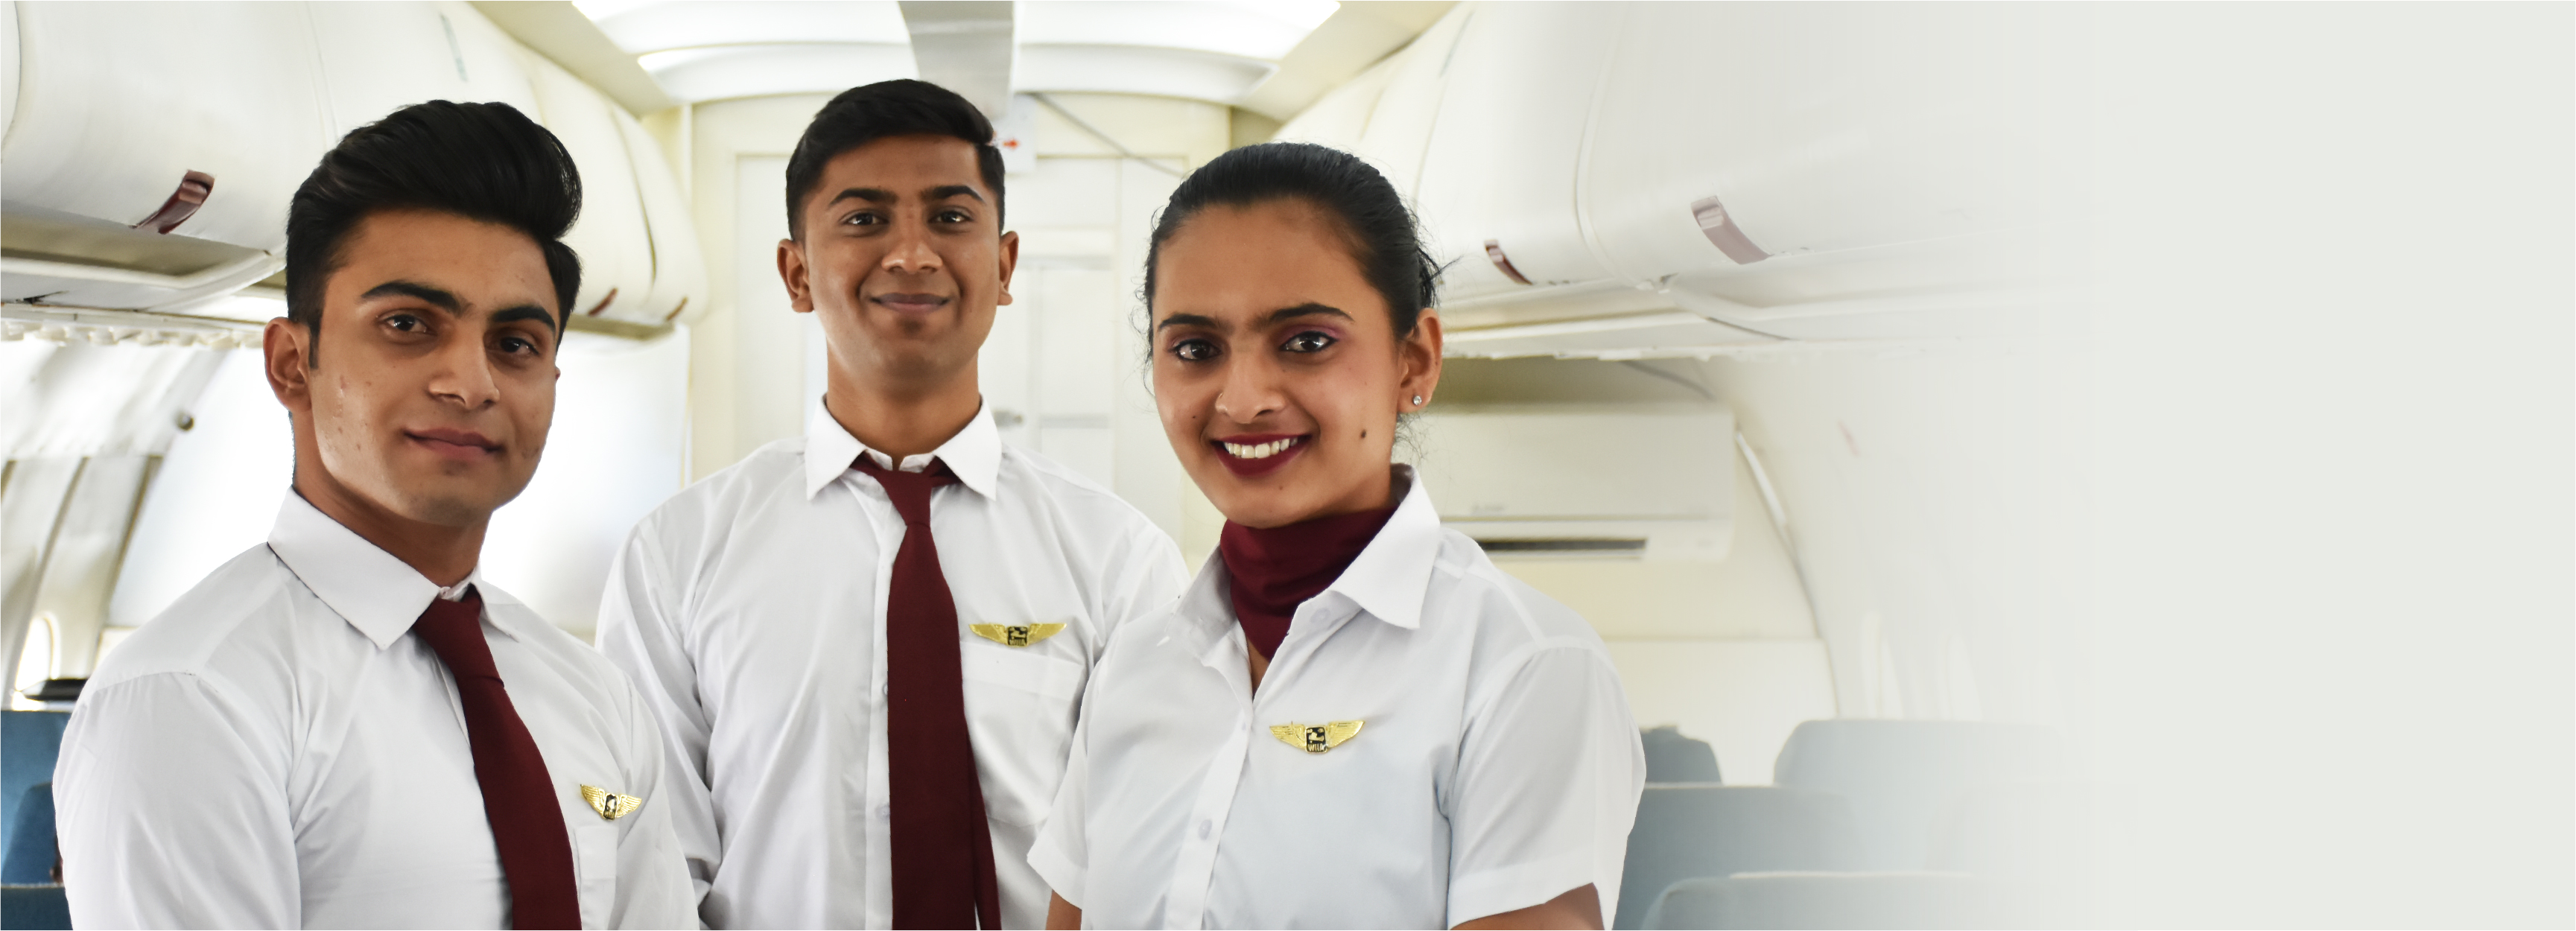 CABIN CREW FEES & ADMISSION PROCESS